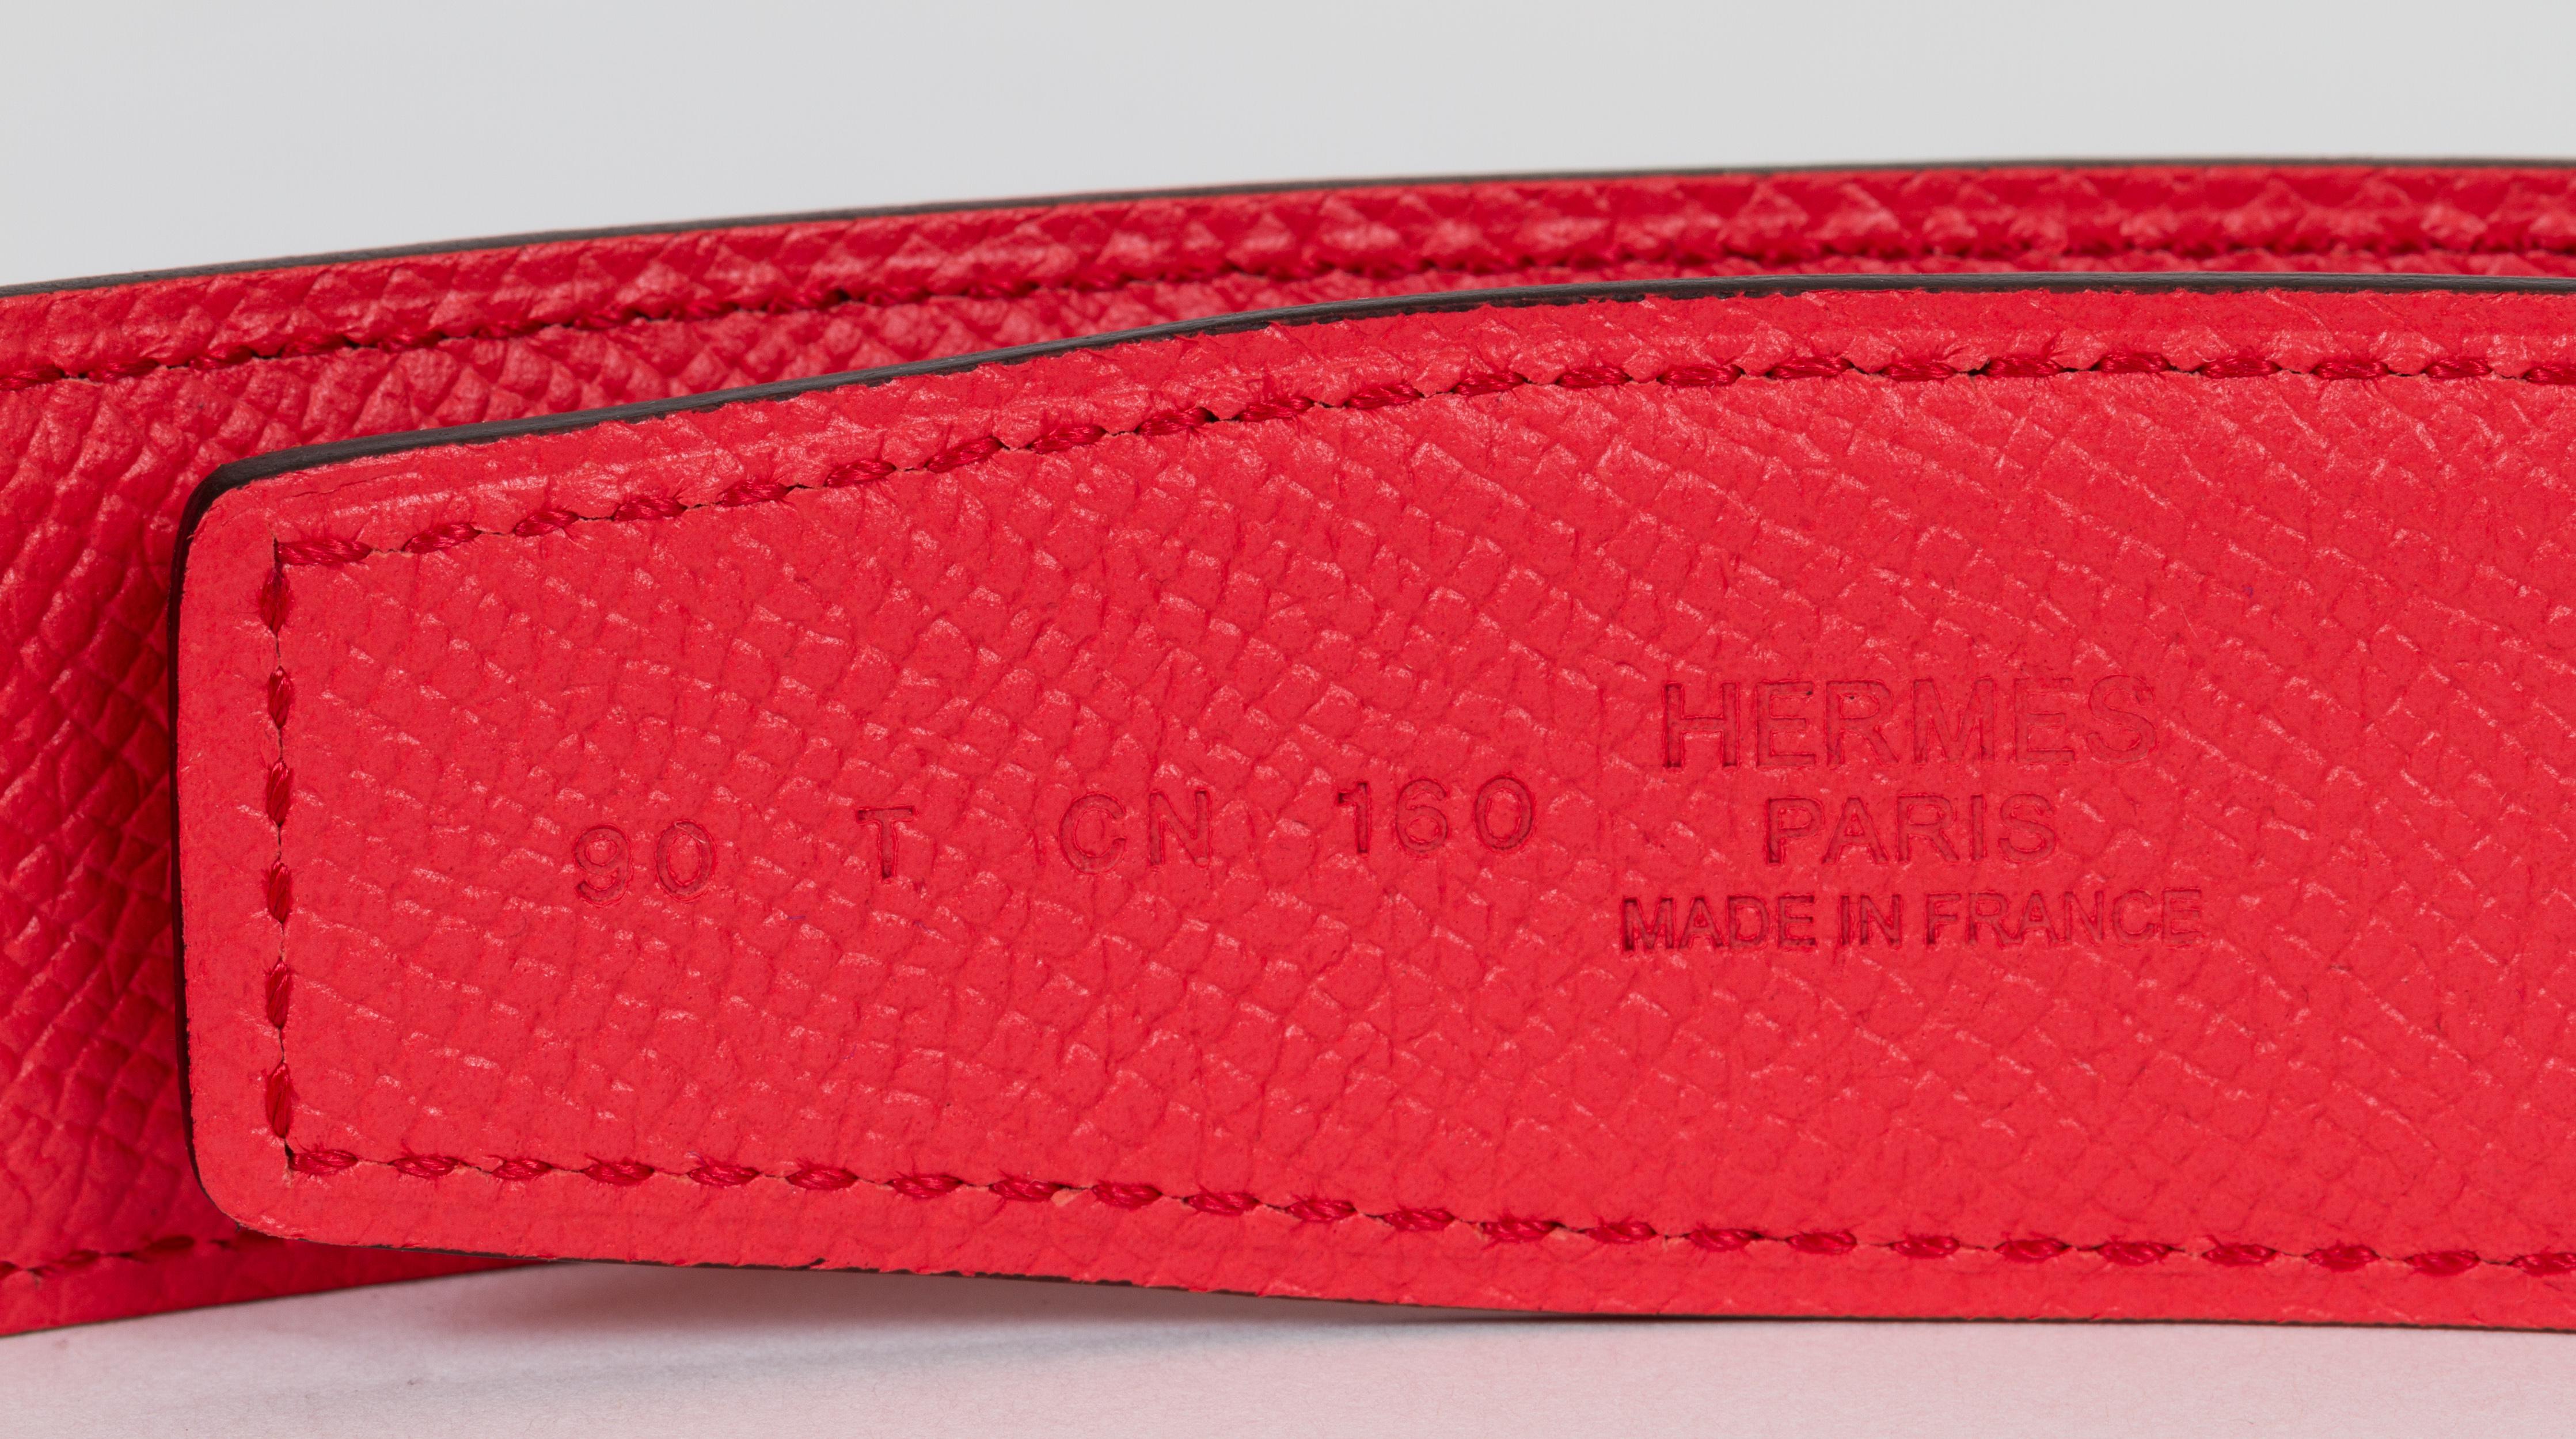 Hermès reversible H belt. Red swift and Bougainville Epsom leather, satin silver rhodium buckle. Dated T for 2015. Size 90cm. Never used. Comes with original box, ribbon and gift bag.